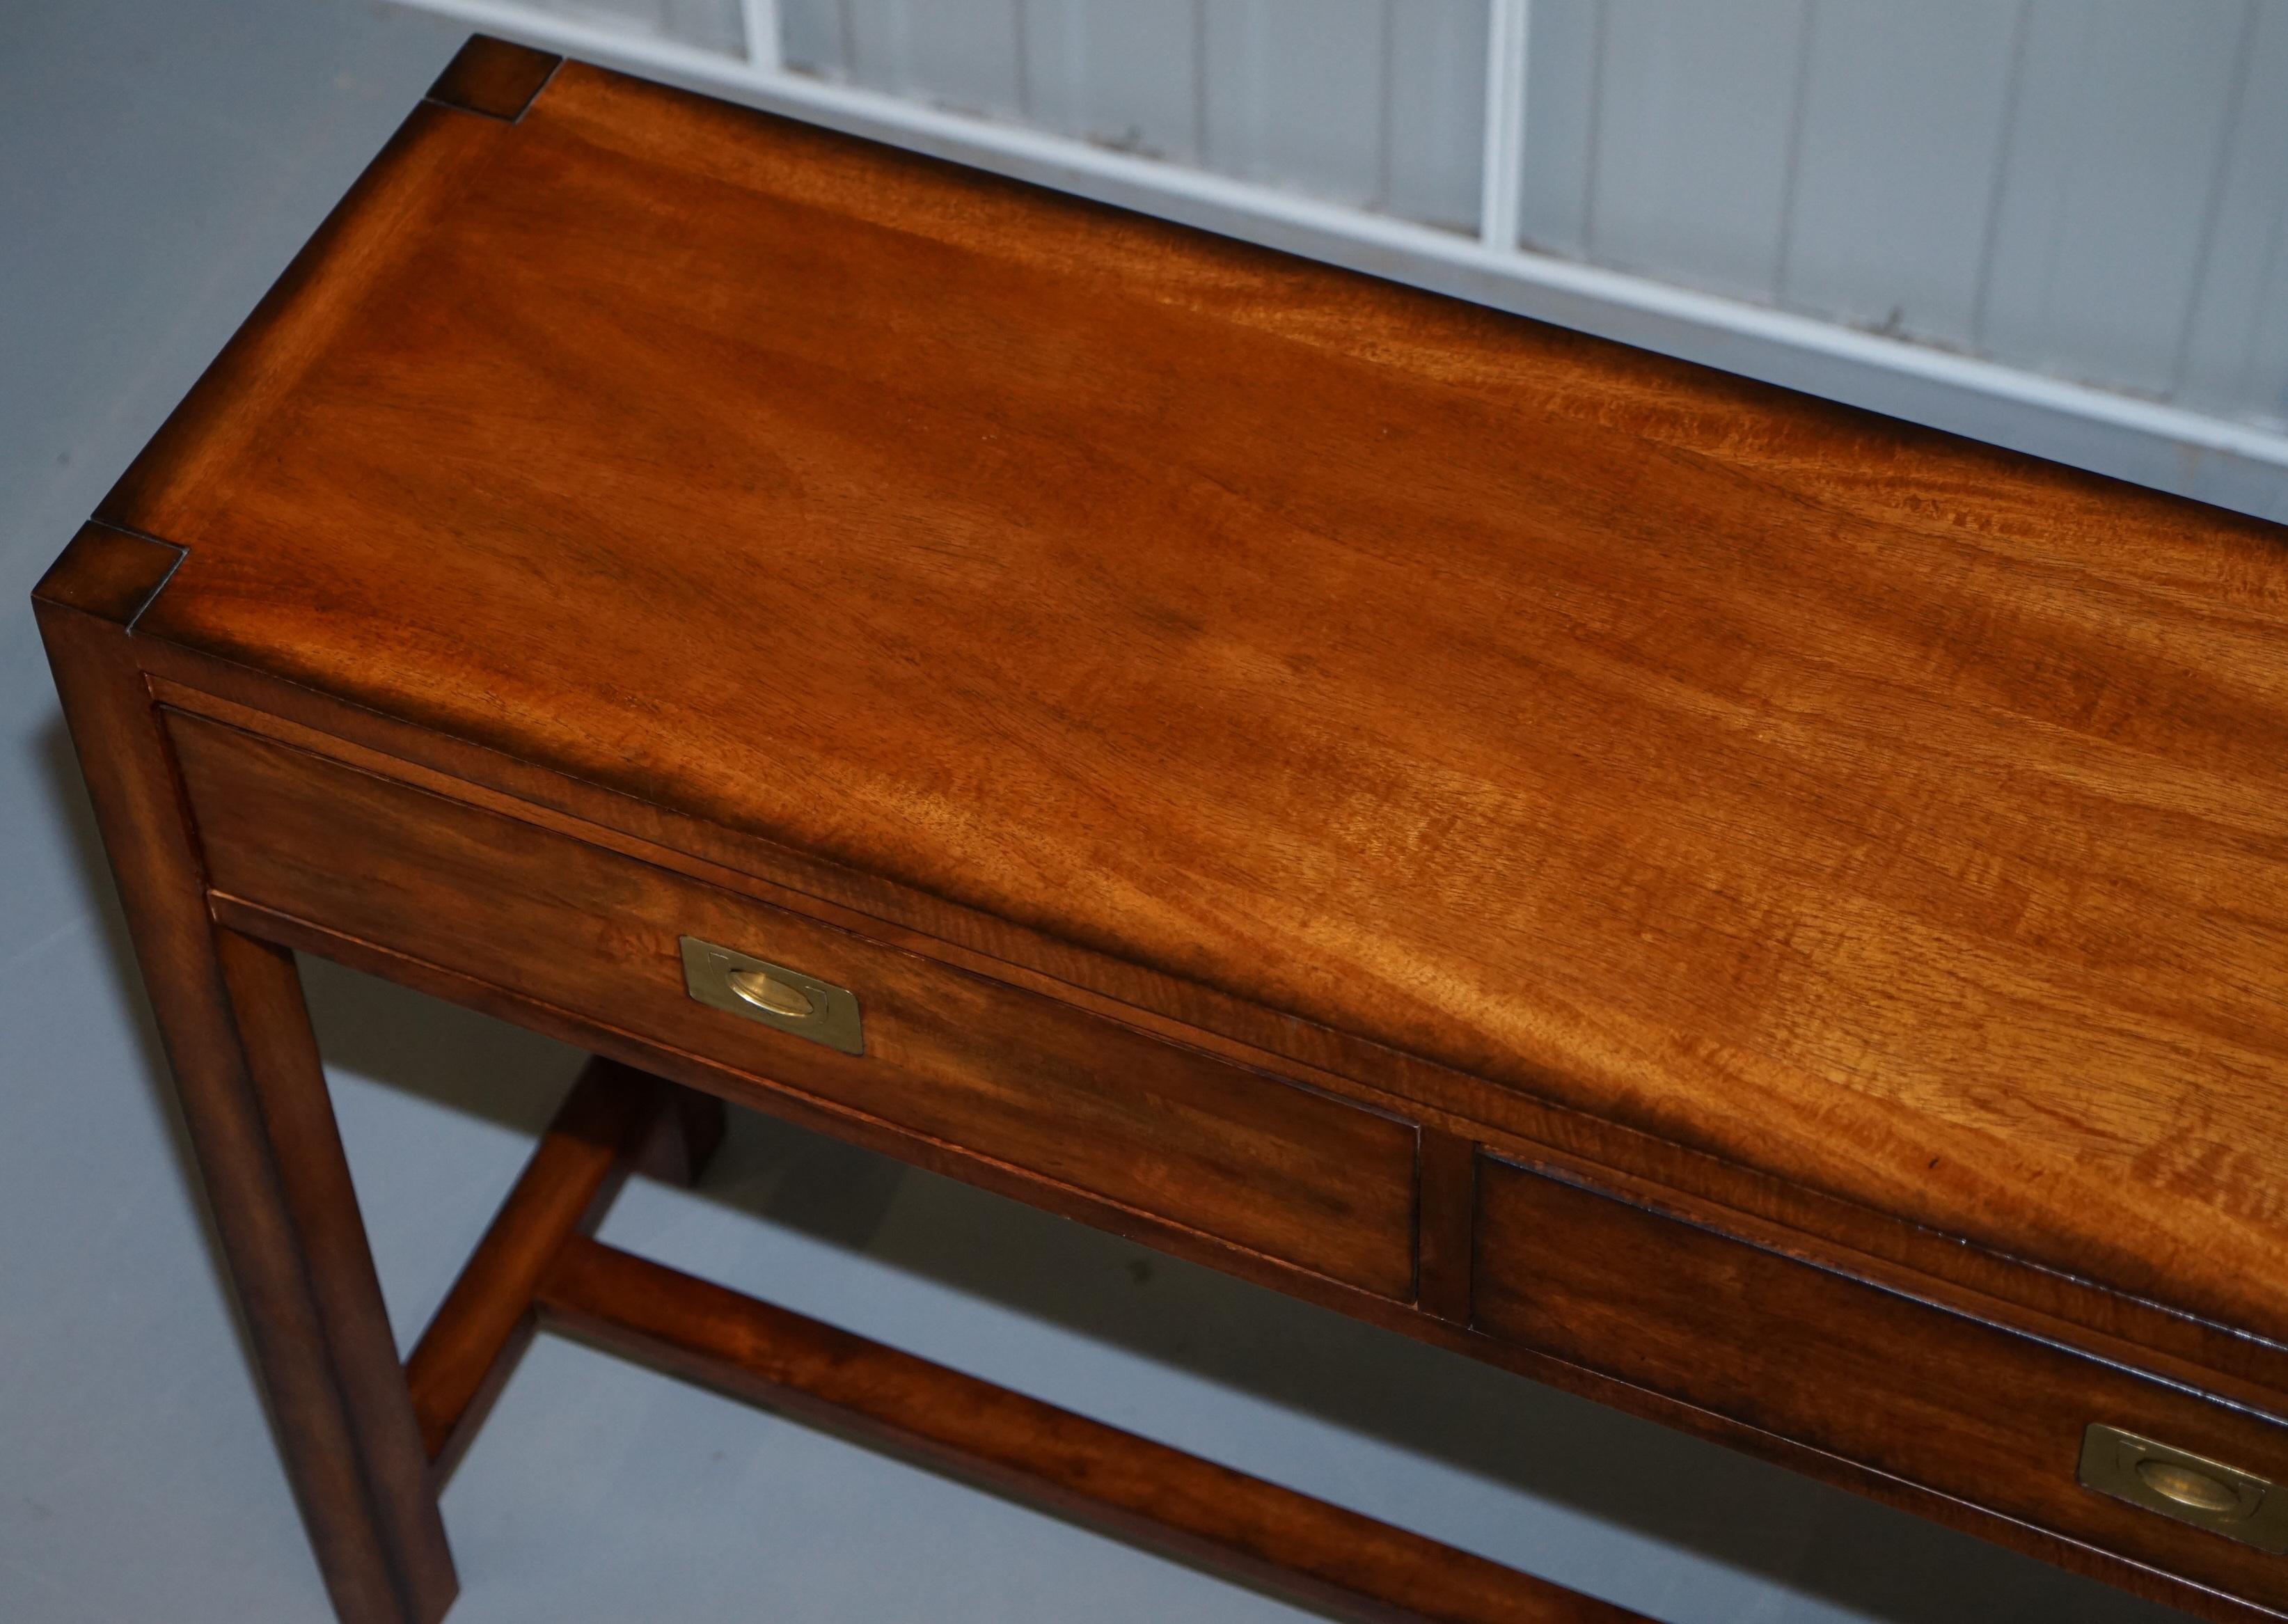 Hand-Crafted Stunning Vintage Military Campaign Mahogany Console Table with Twin Drawers